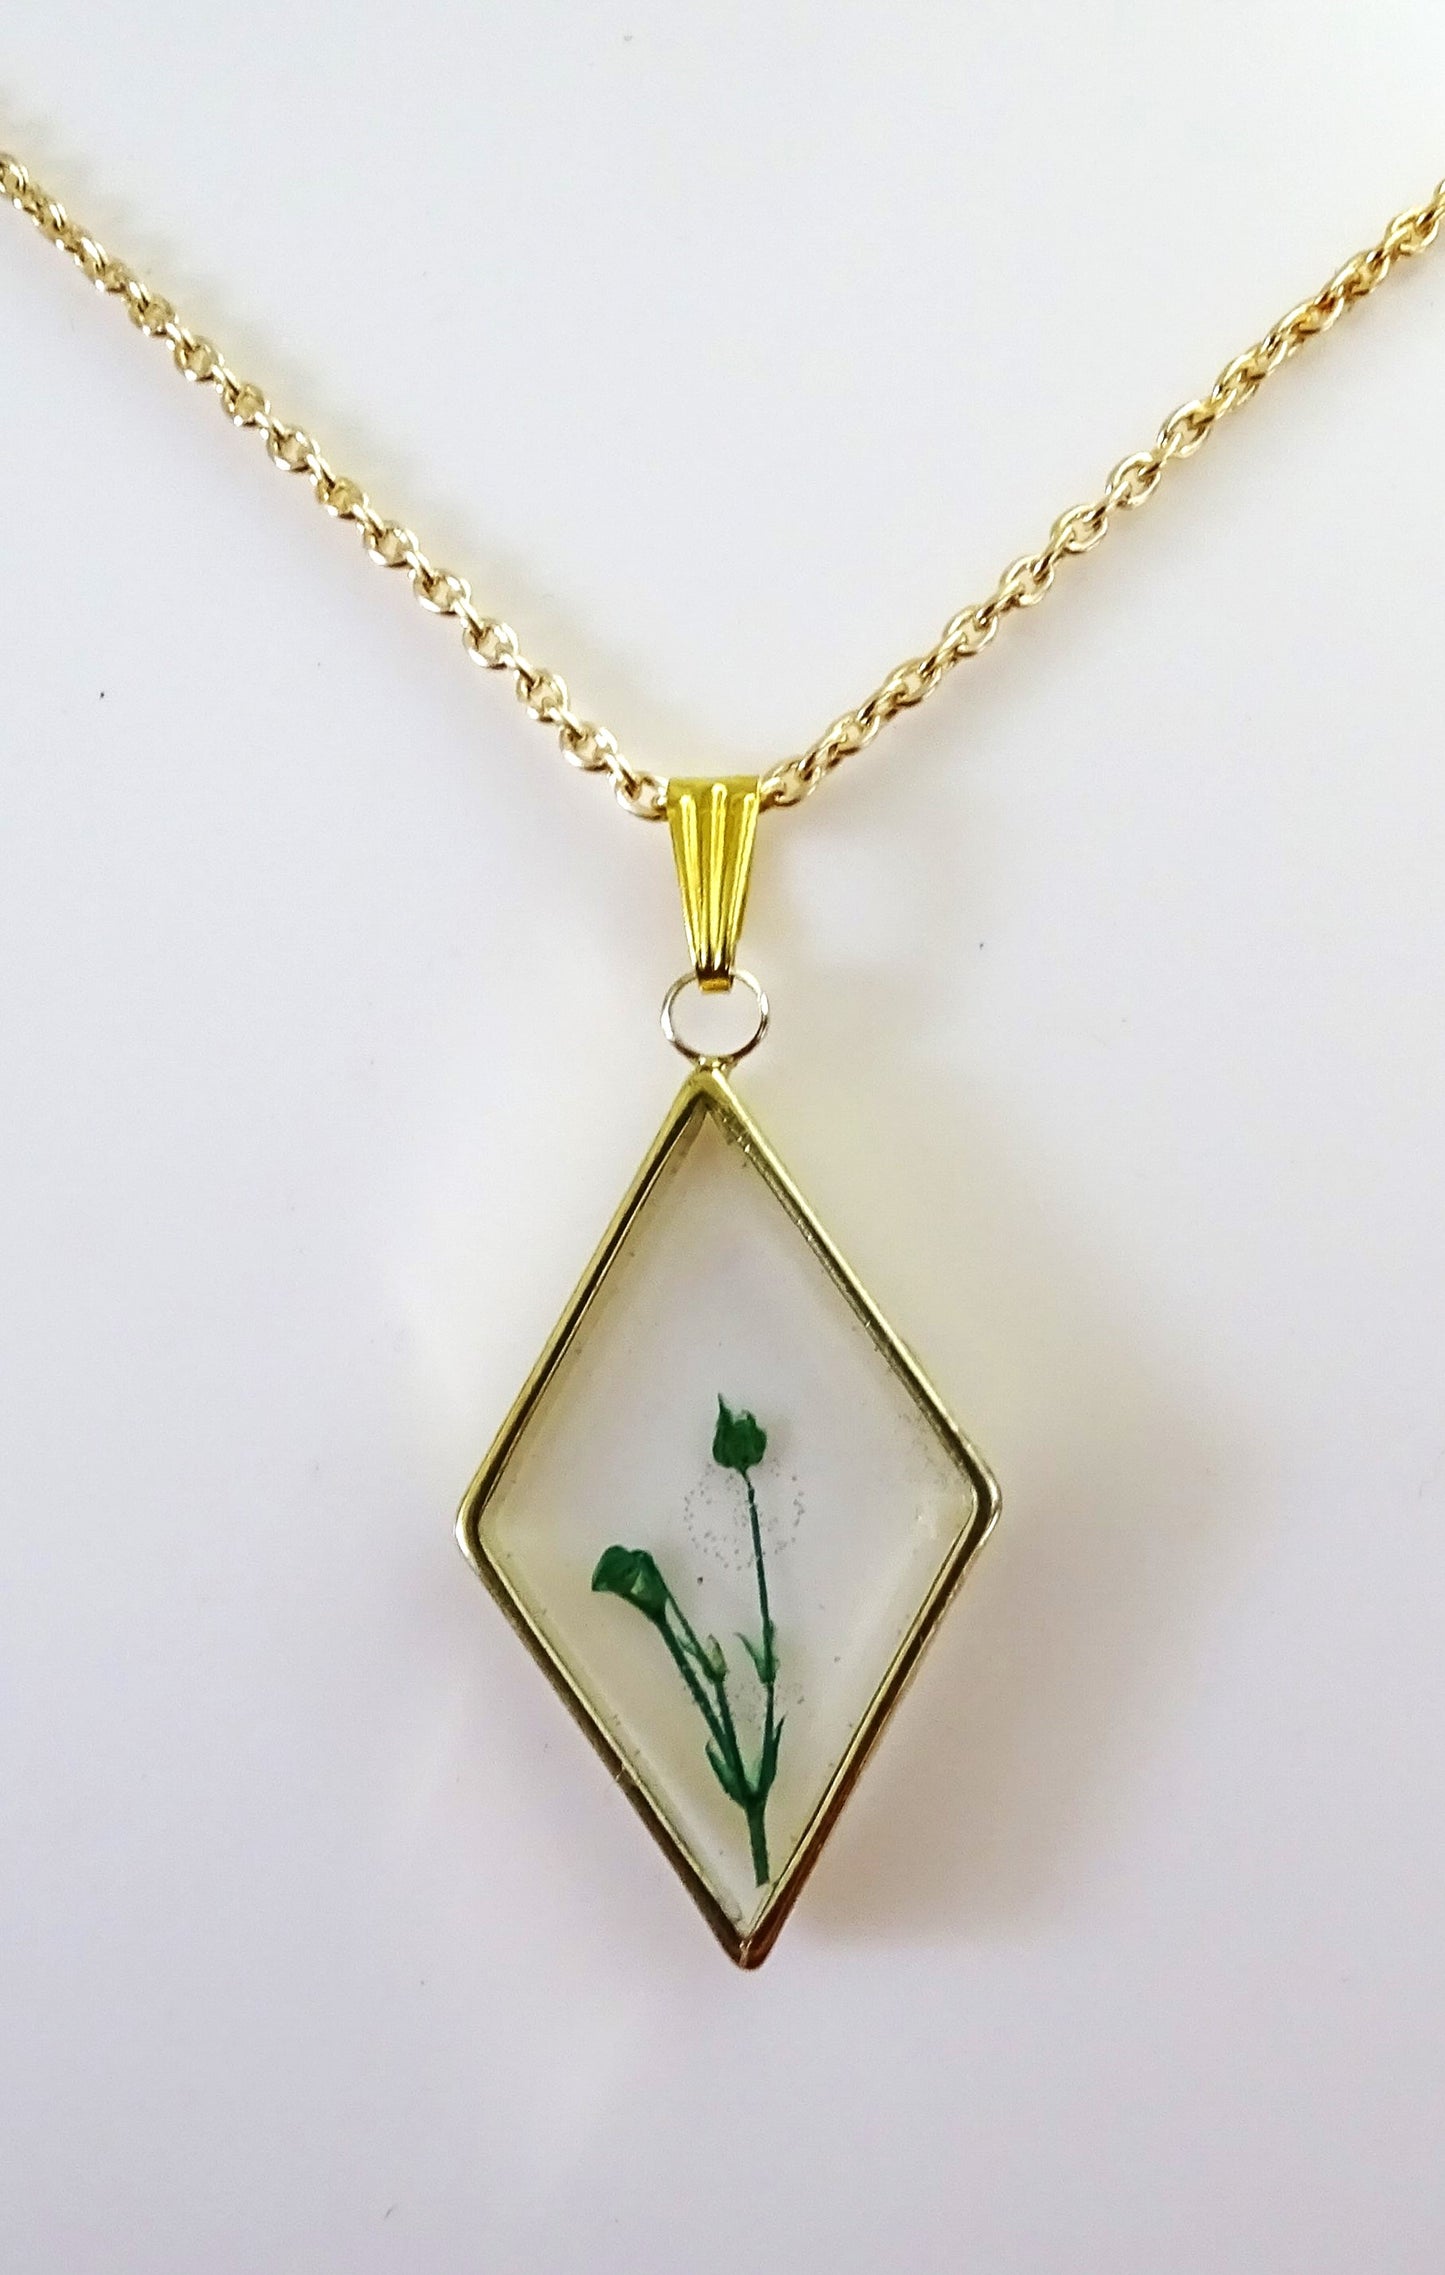 Pendant with Preserved Green Bud and Leaf